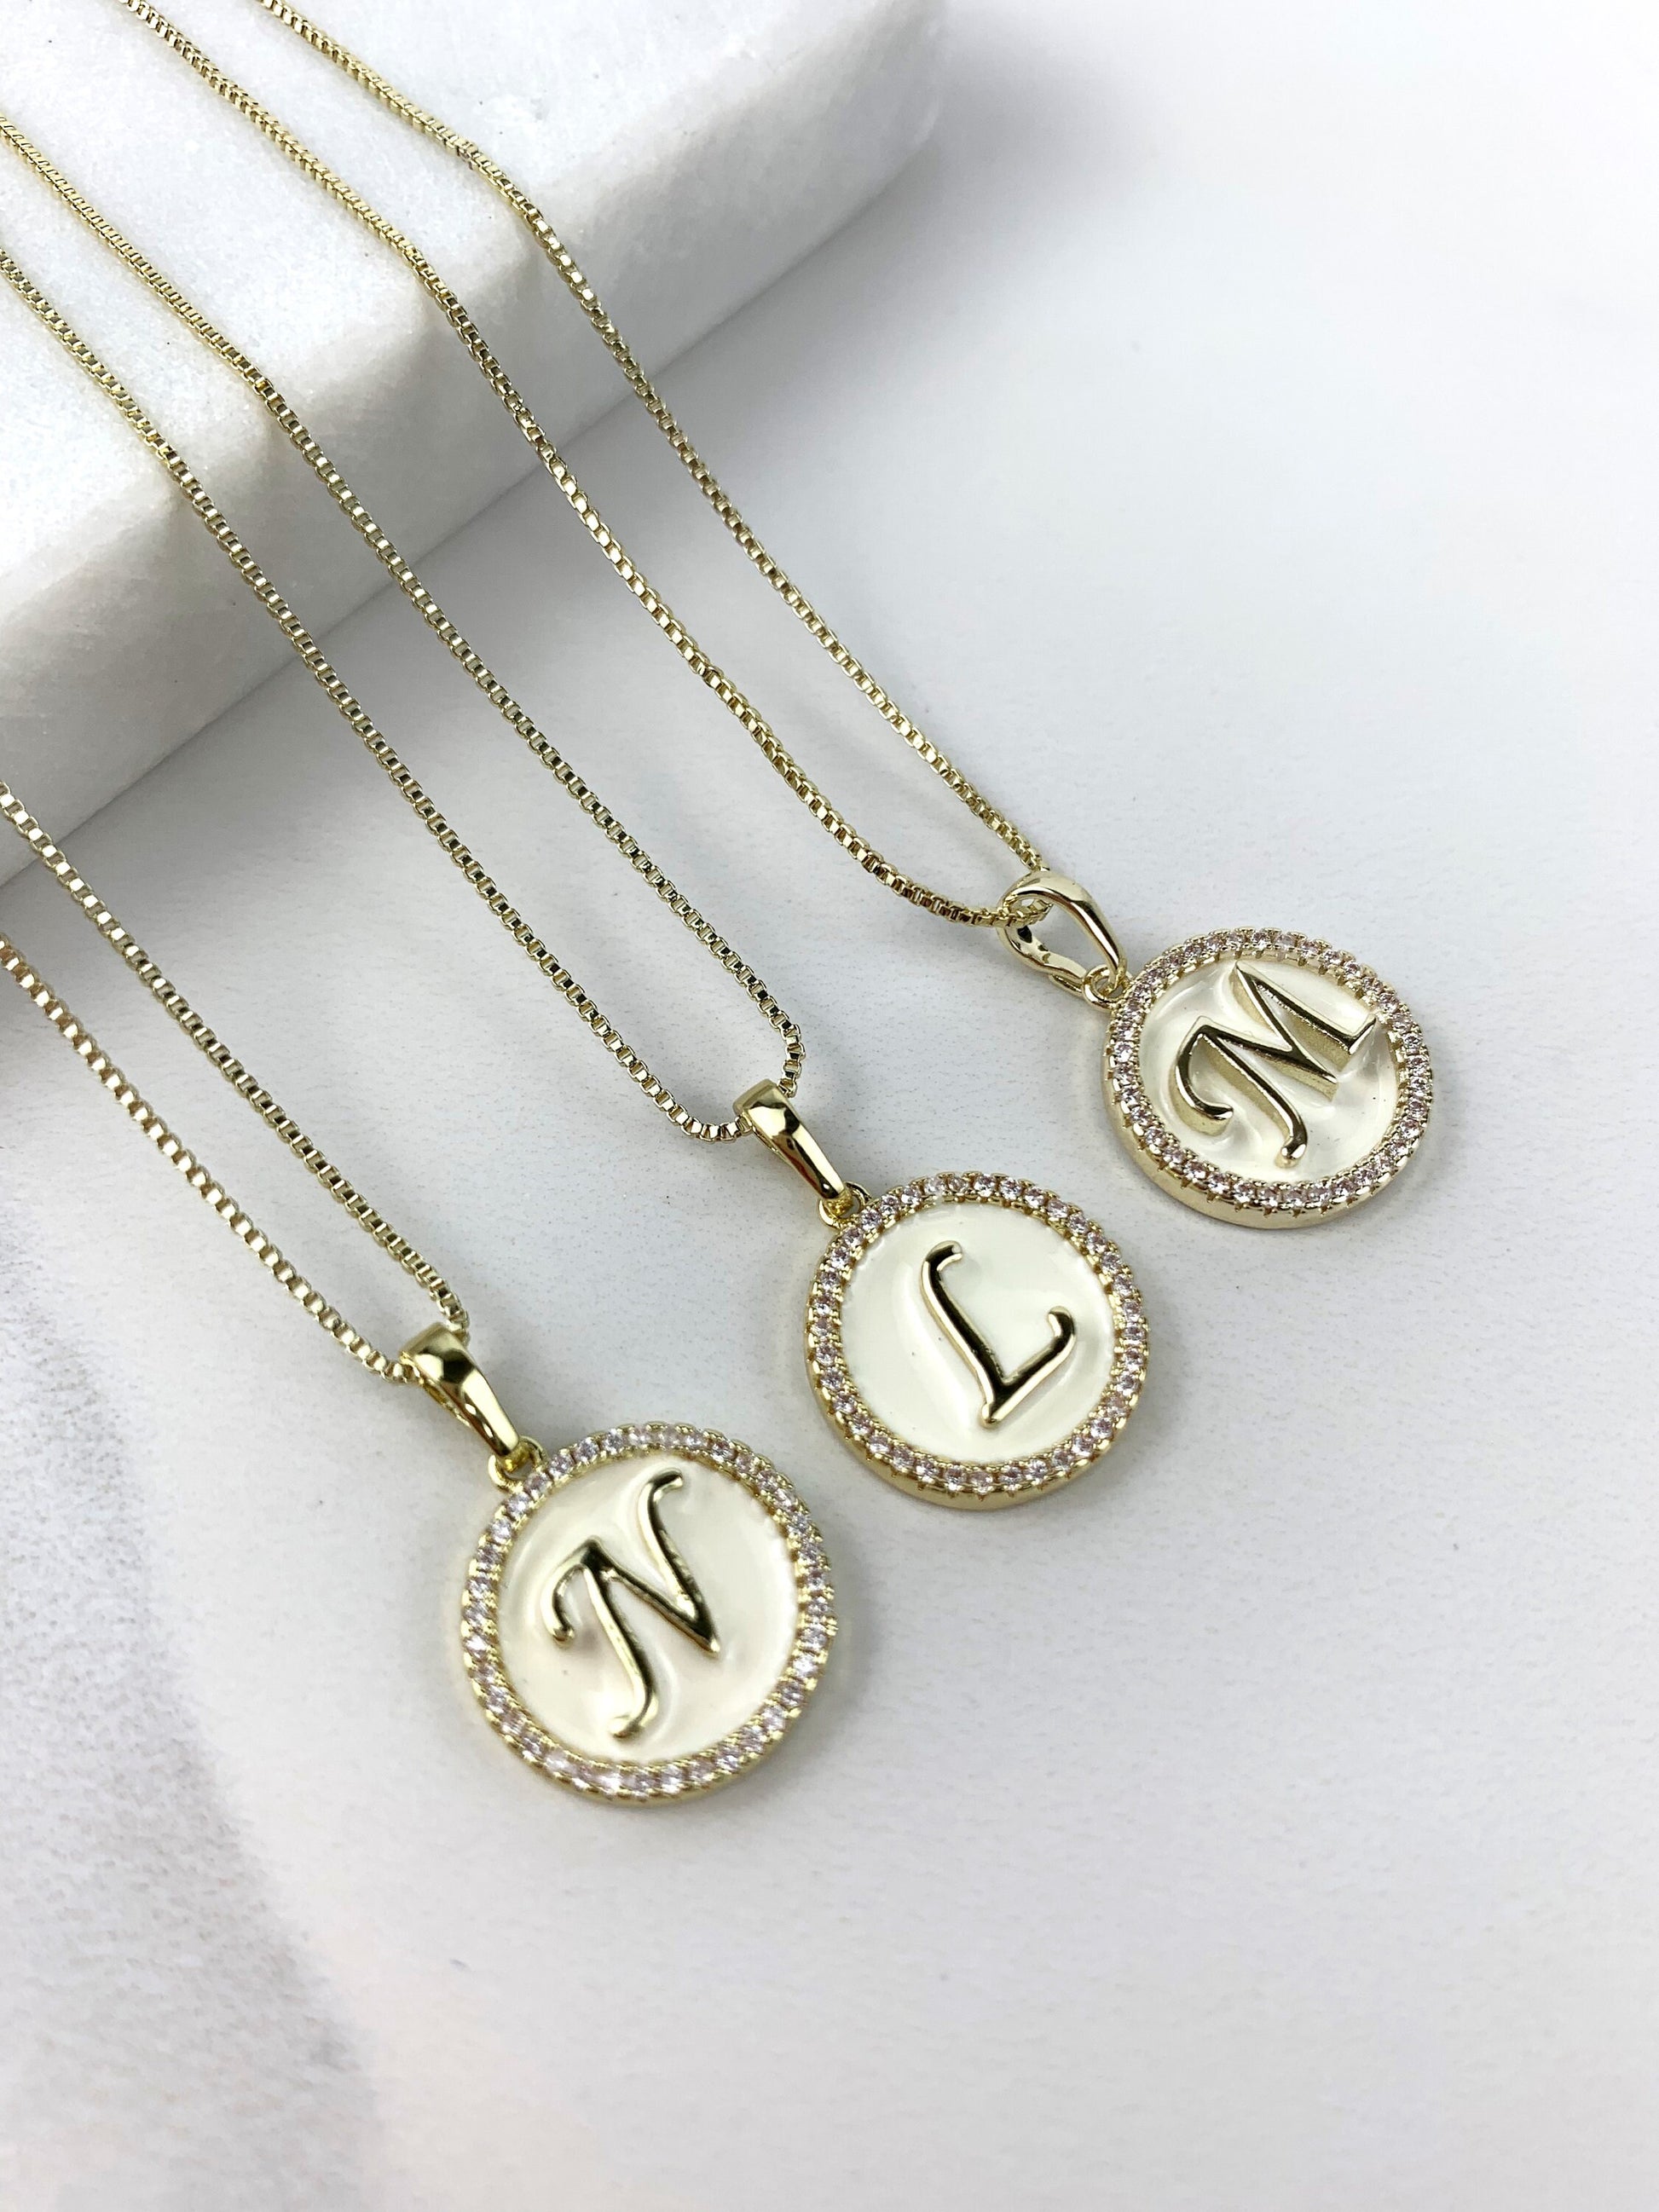 18k Gold Filled With Zirconia Initials Charms Fancy Necklace Wholesale Jewelry Supplies